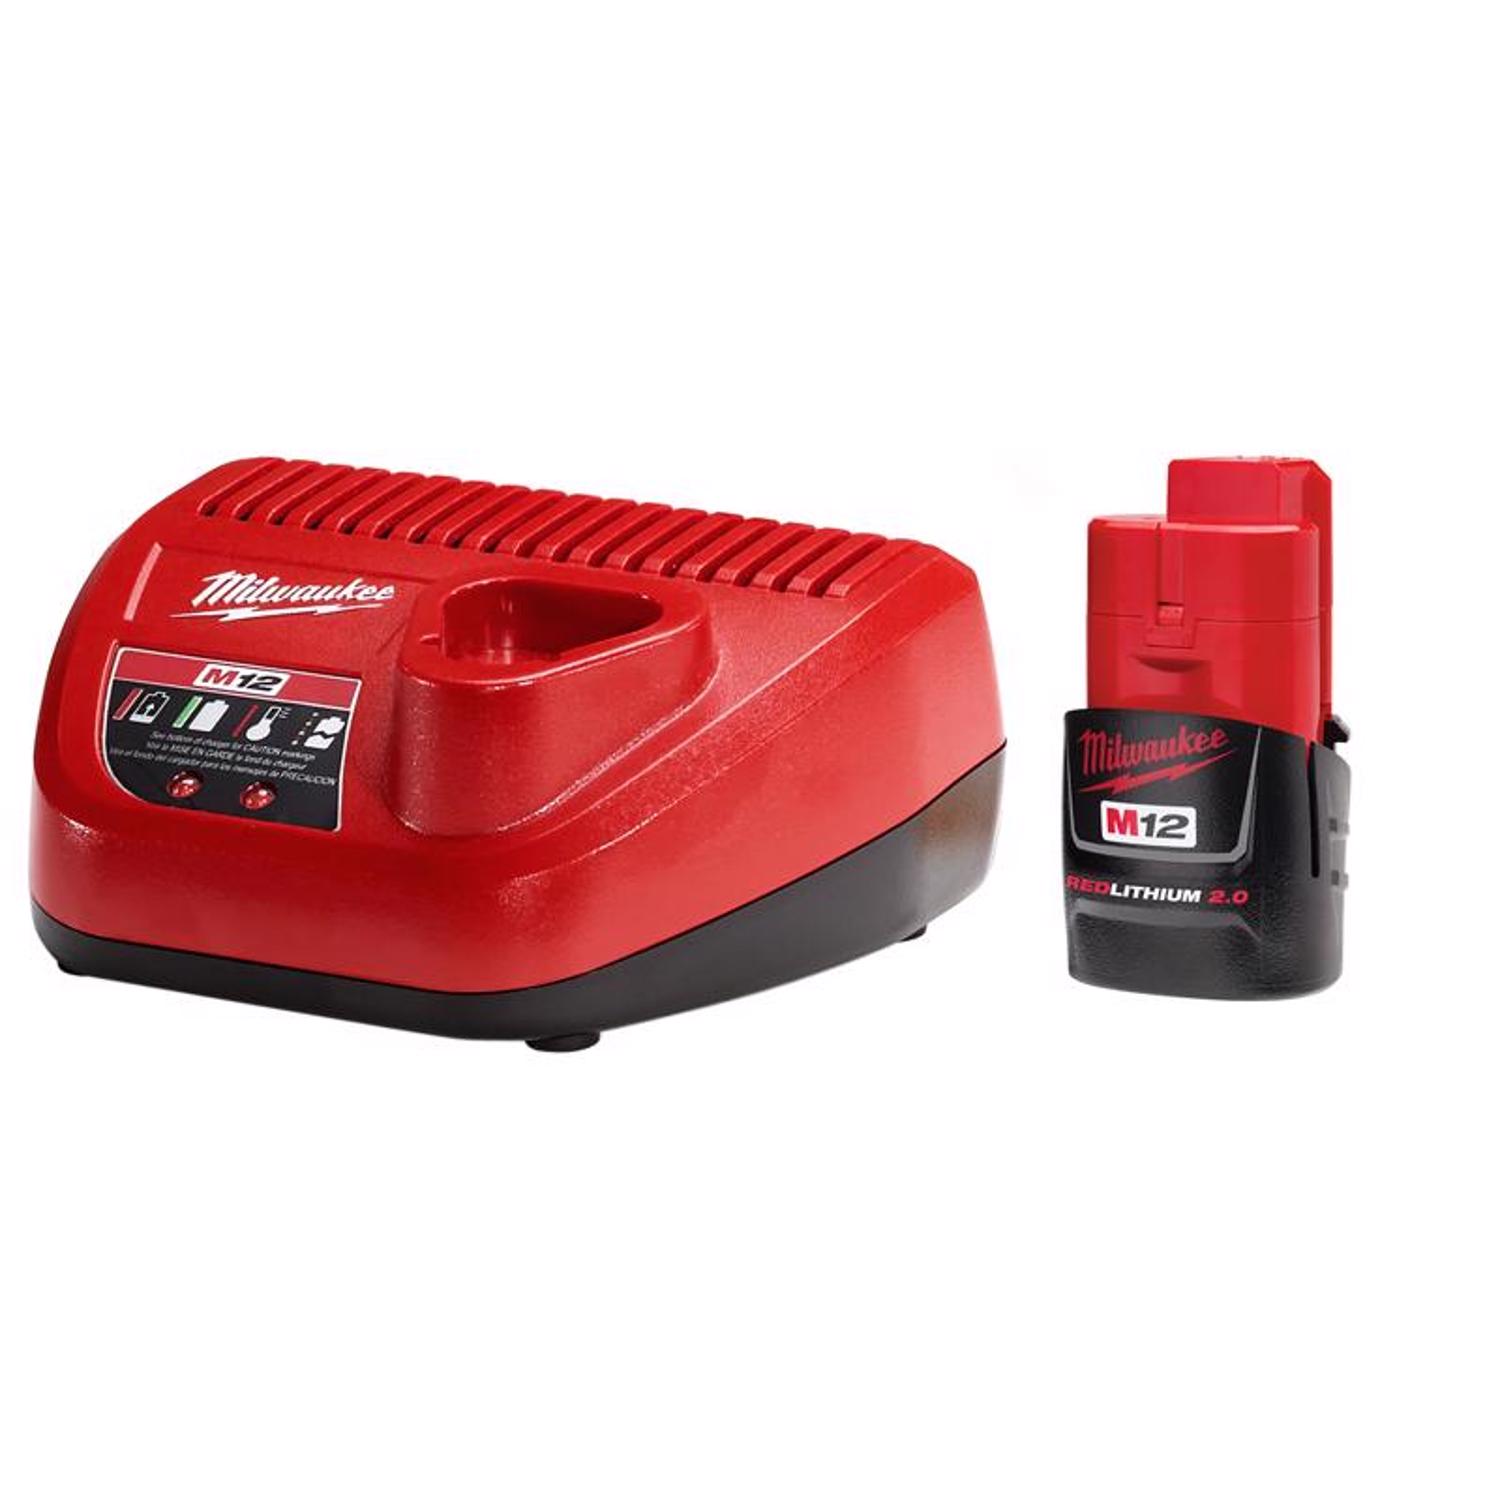 Photos - Power Tool Battery Milwaukee M12 RedLithium CP 2 Ah Lithium-Ion Battery and Charger 2 pc 48-5 